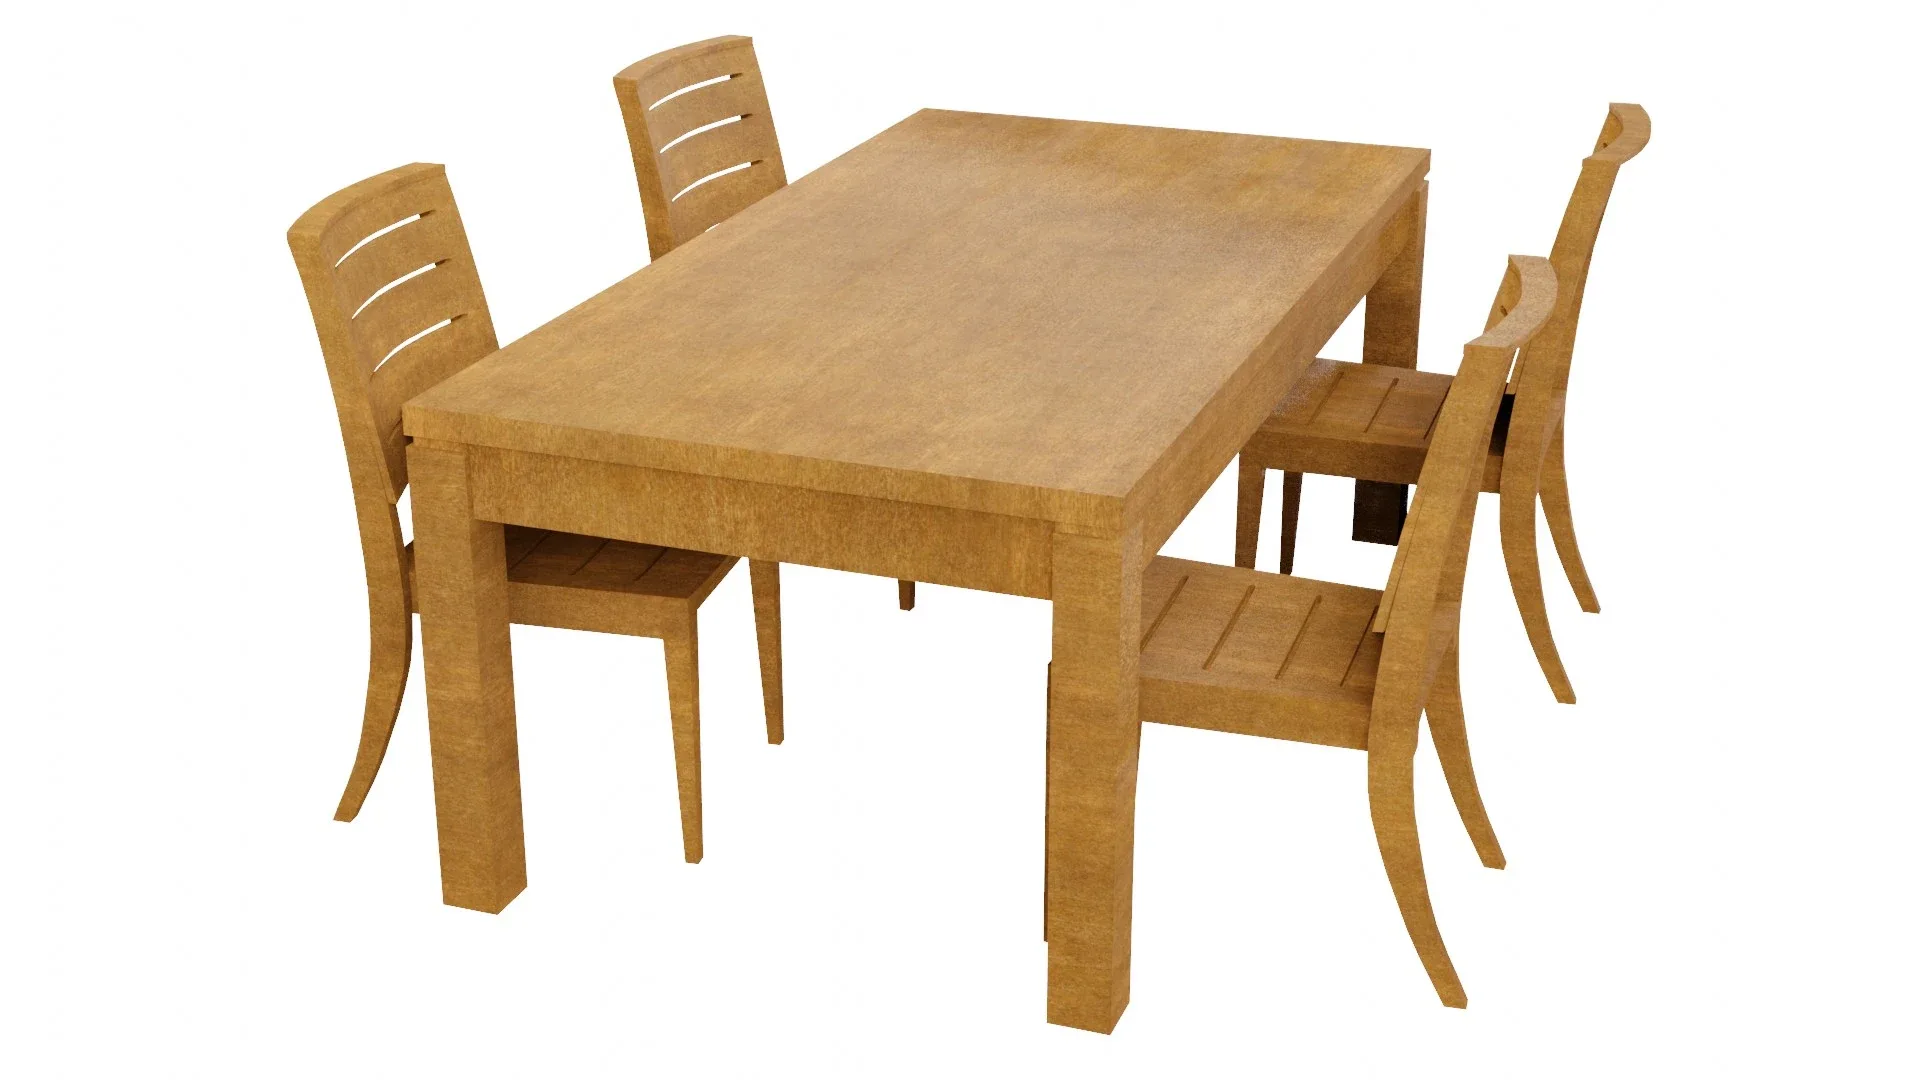 Wooden Table & Chairs 3D Model